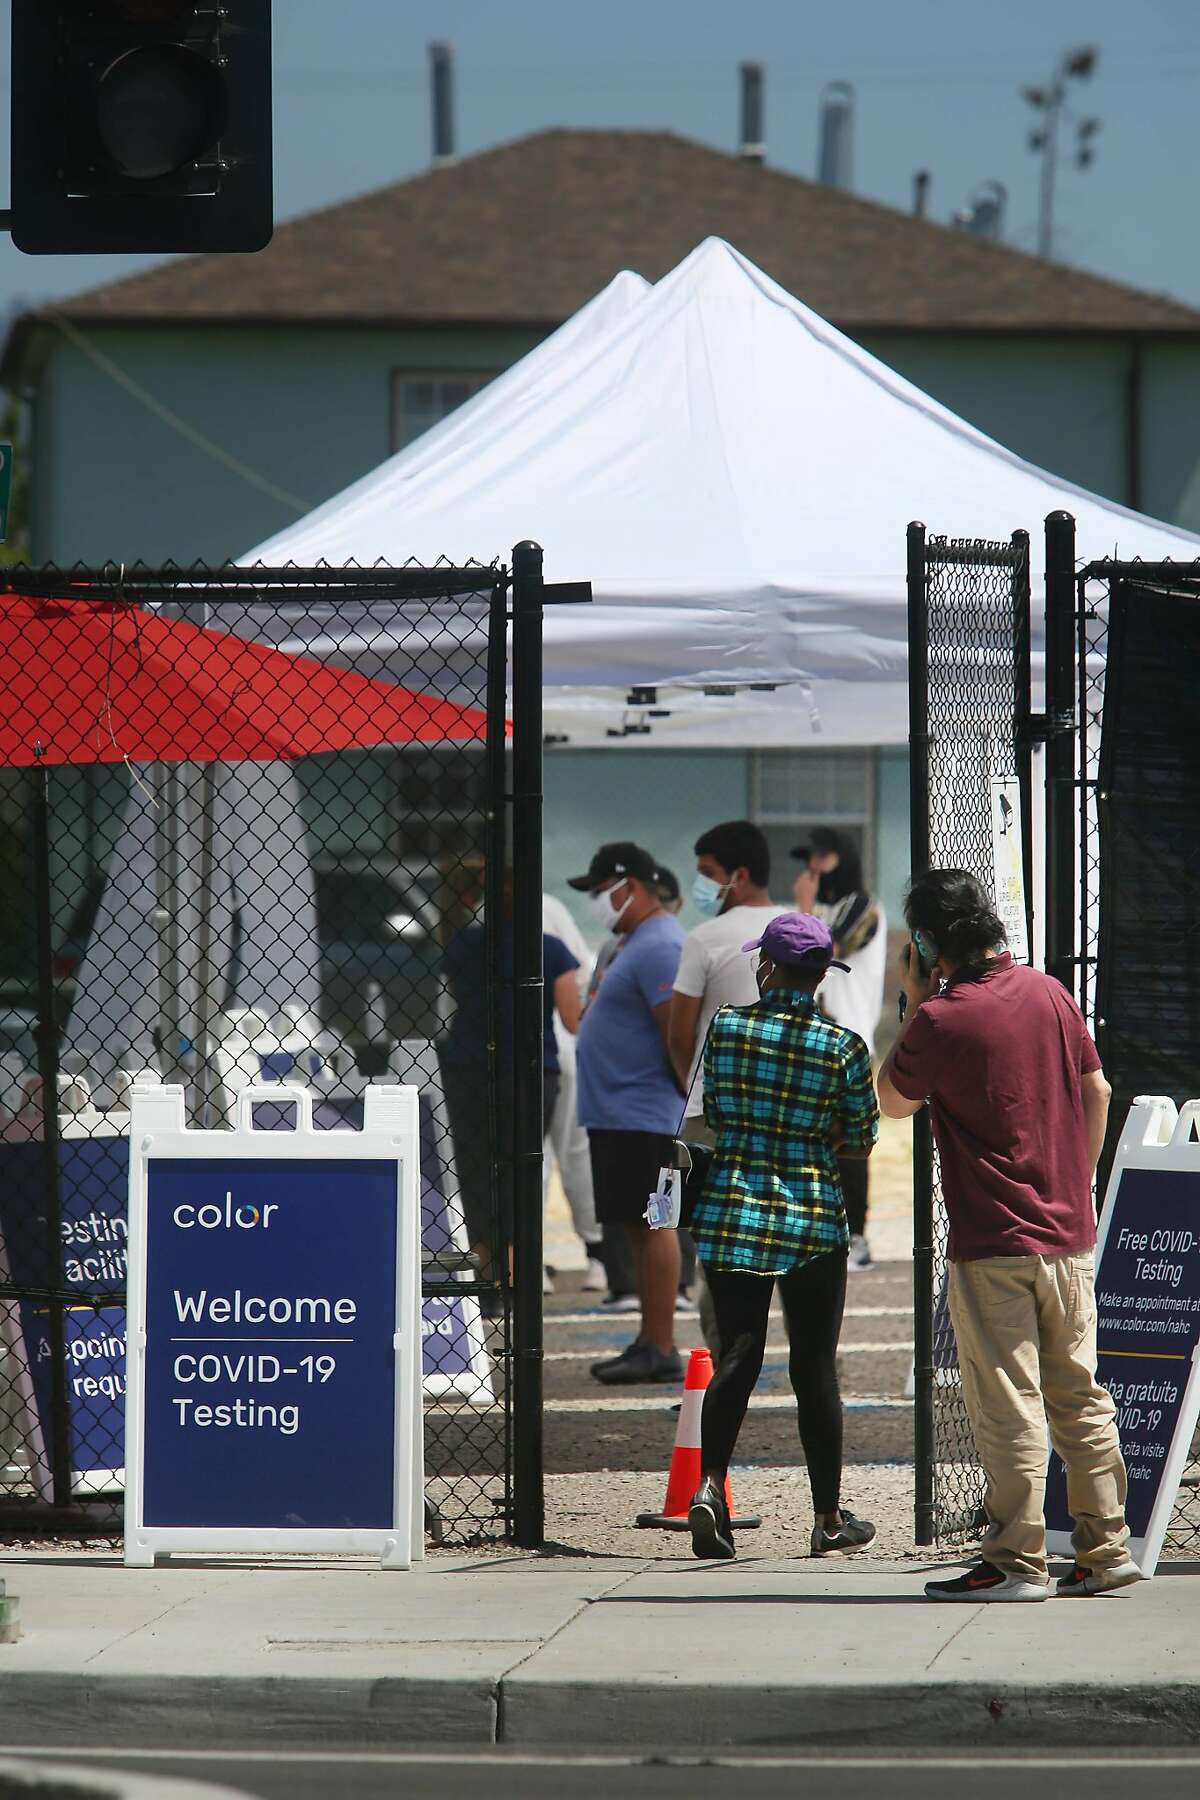 People line up for testing at the COVID-19 testing site at the Native American Health Center on Thursday, July 9, 2020 in Oakland, Calif.